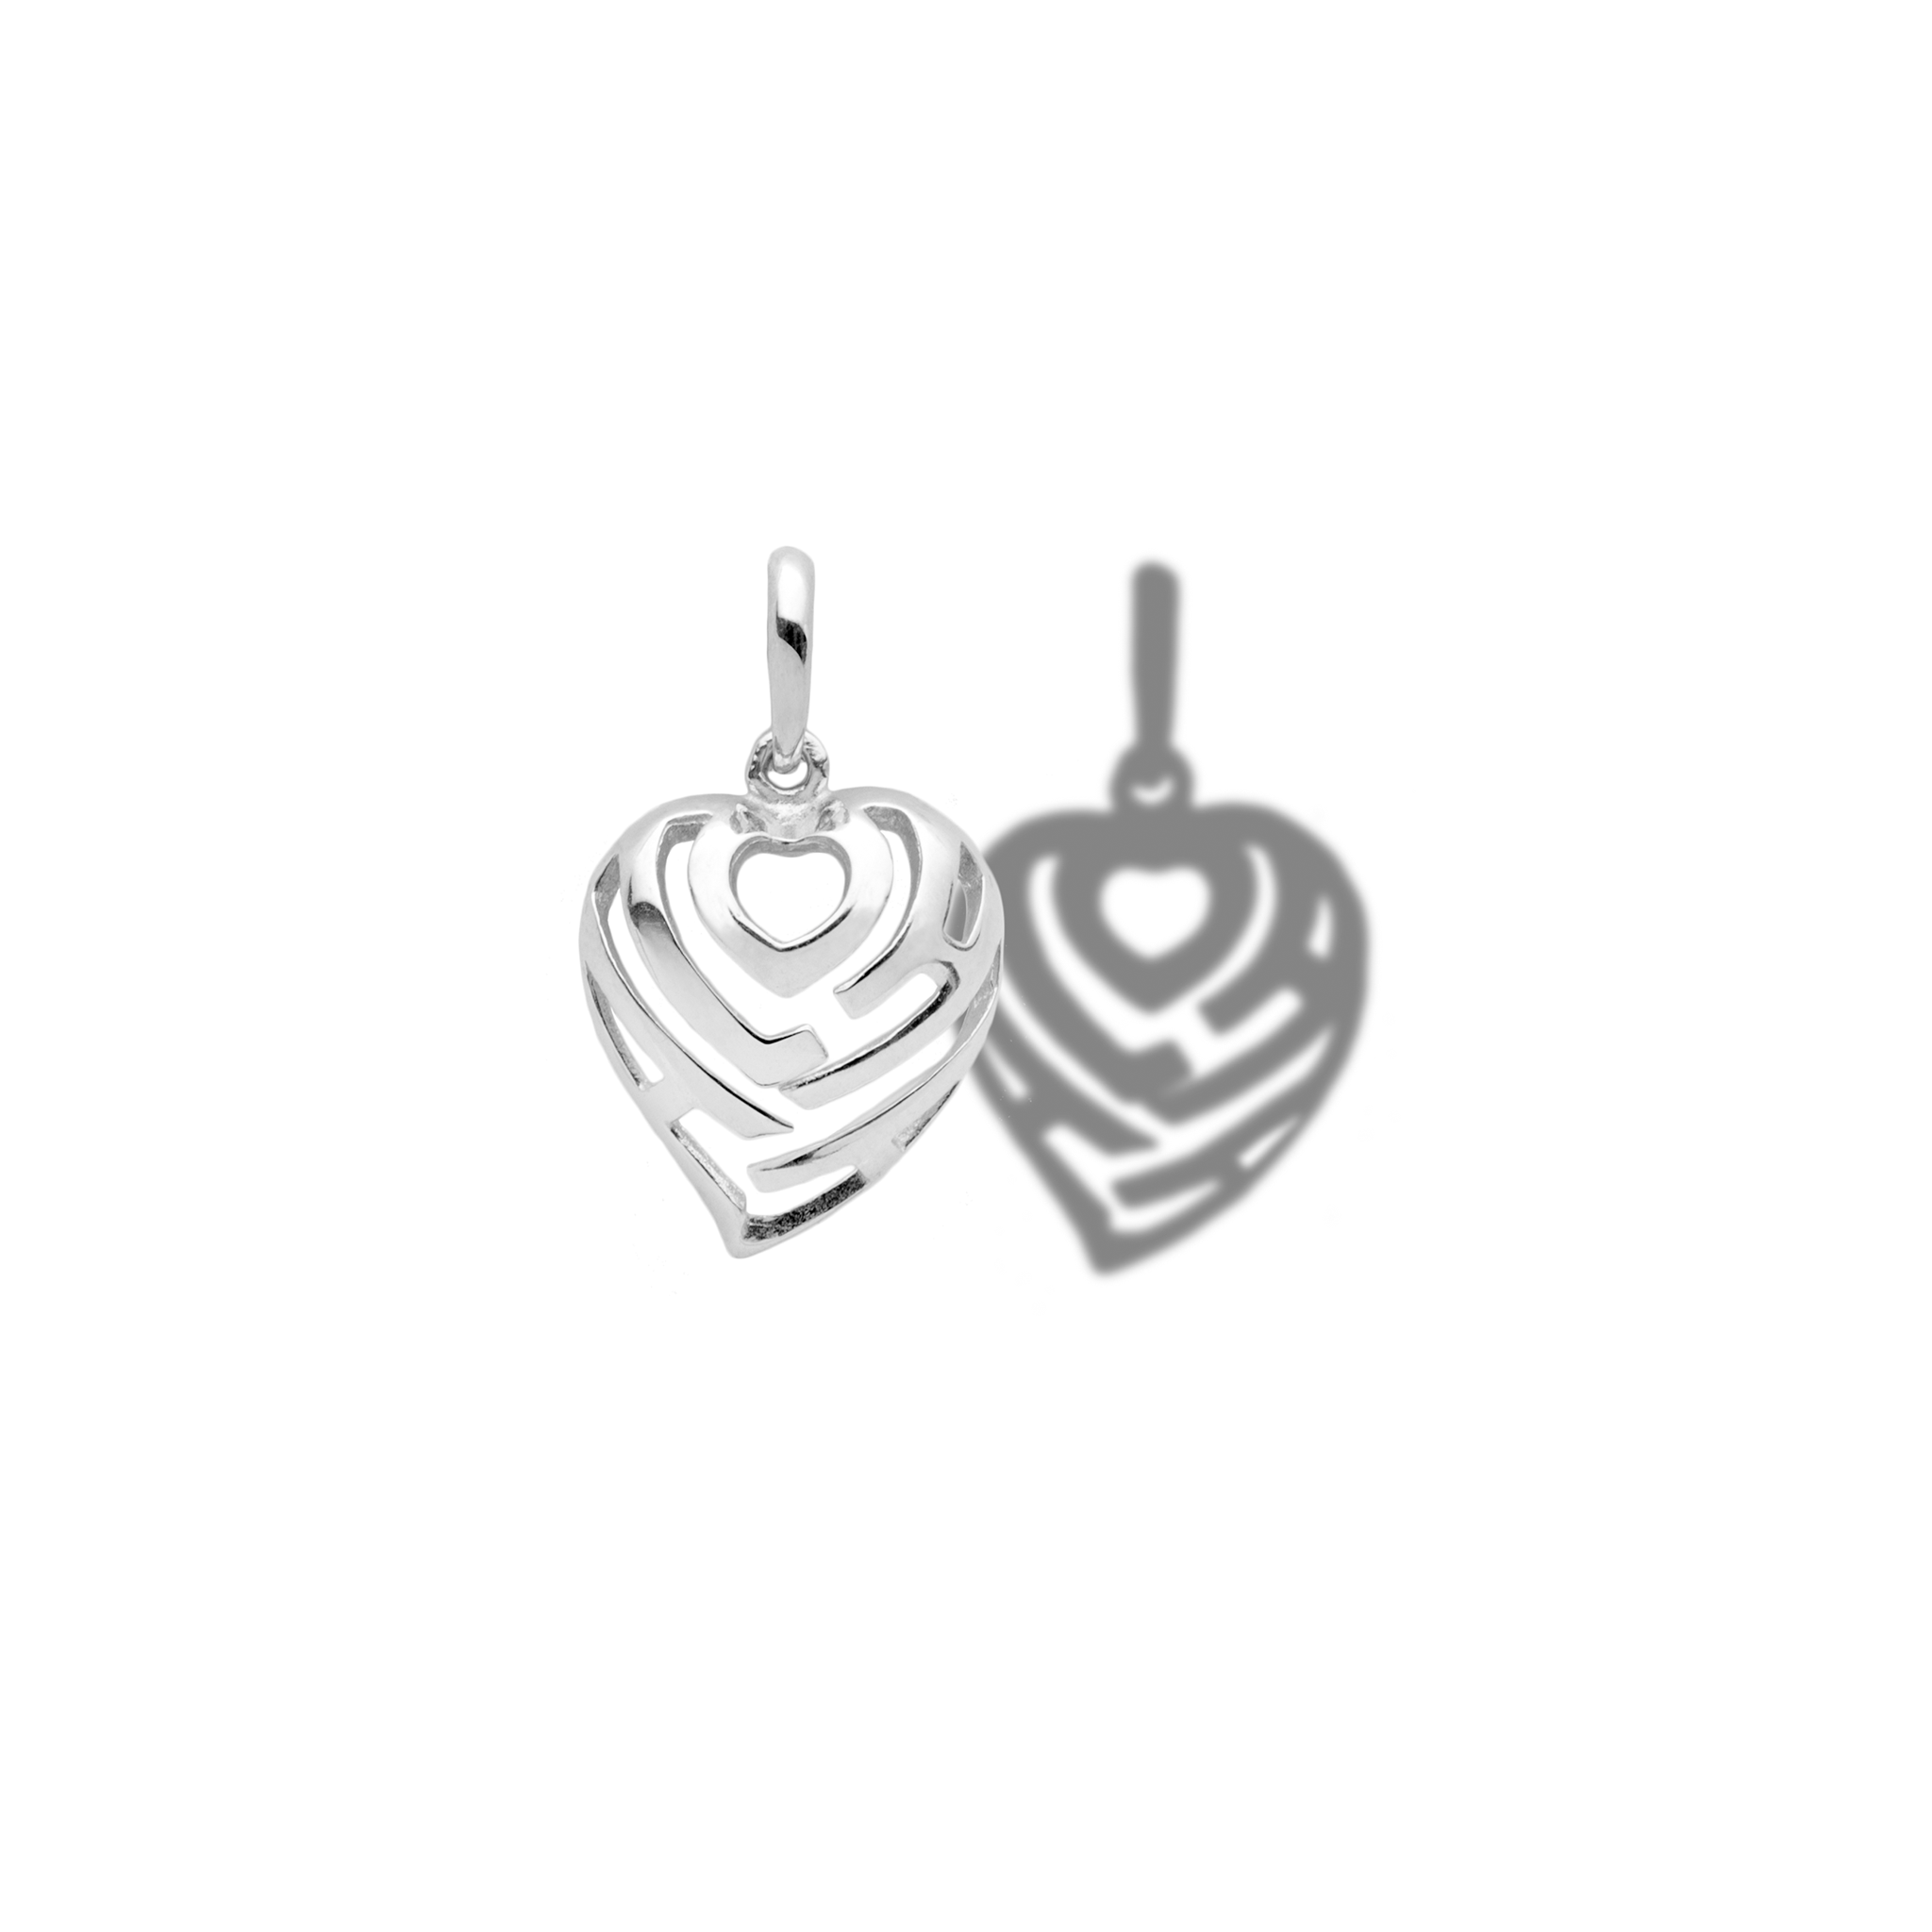 Aloha Heart Charm/Pendant in Sterling Silver - 12mm